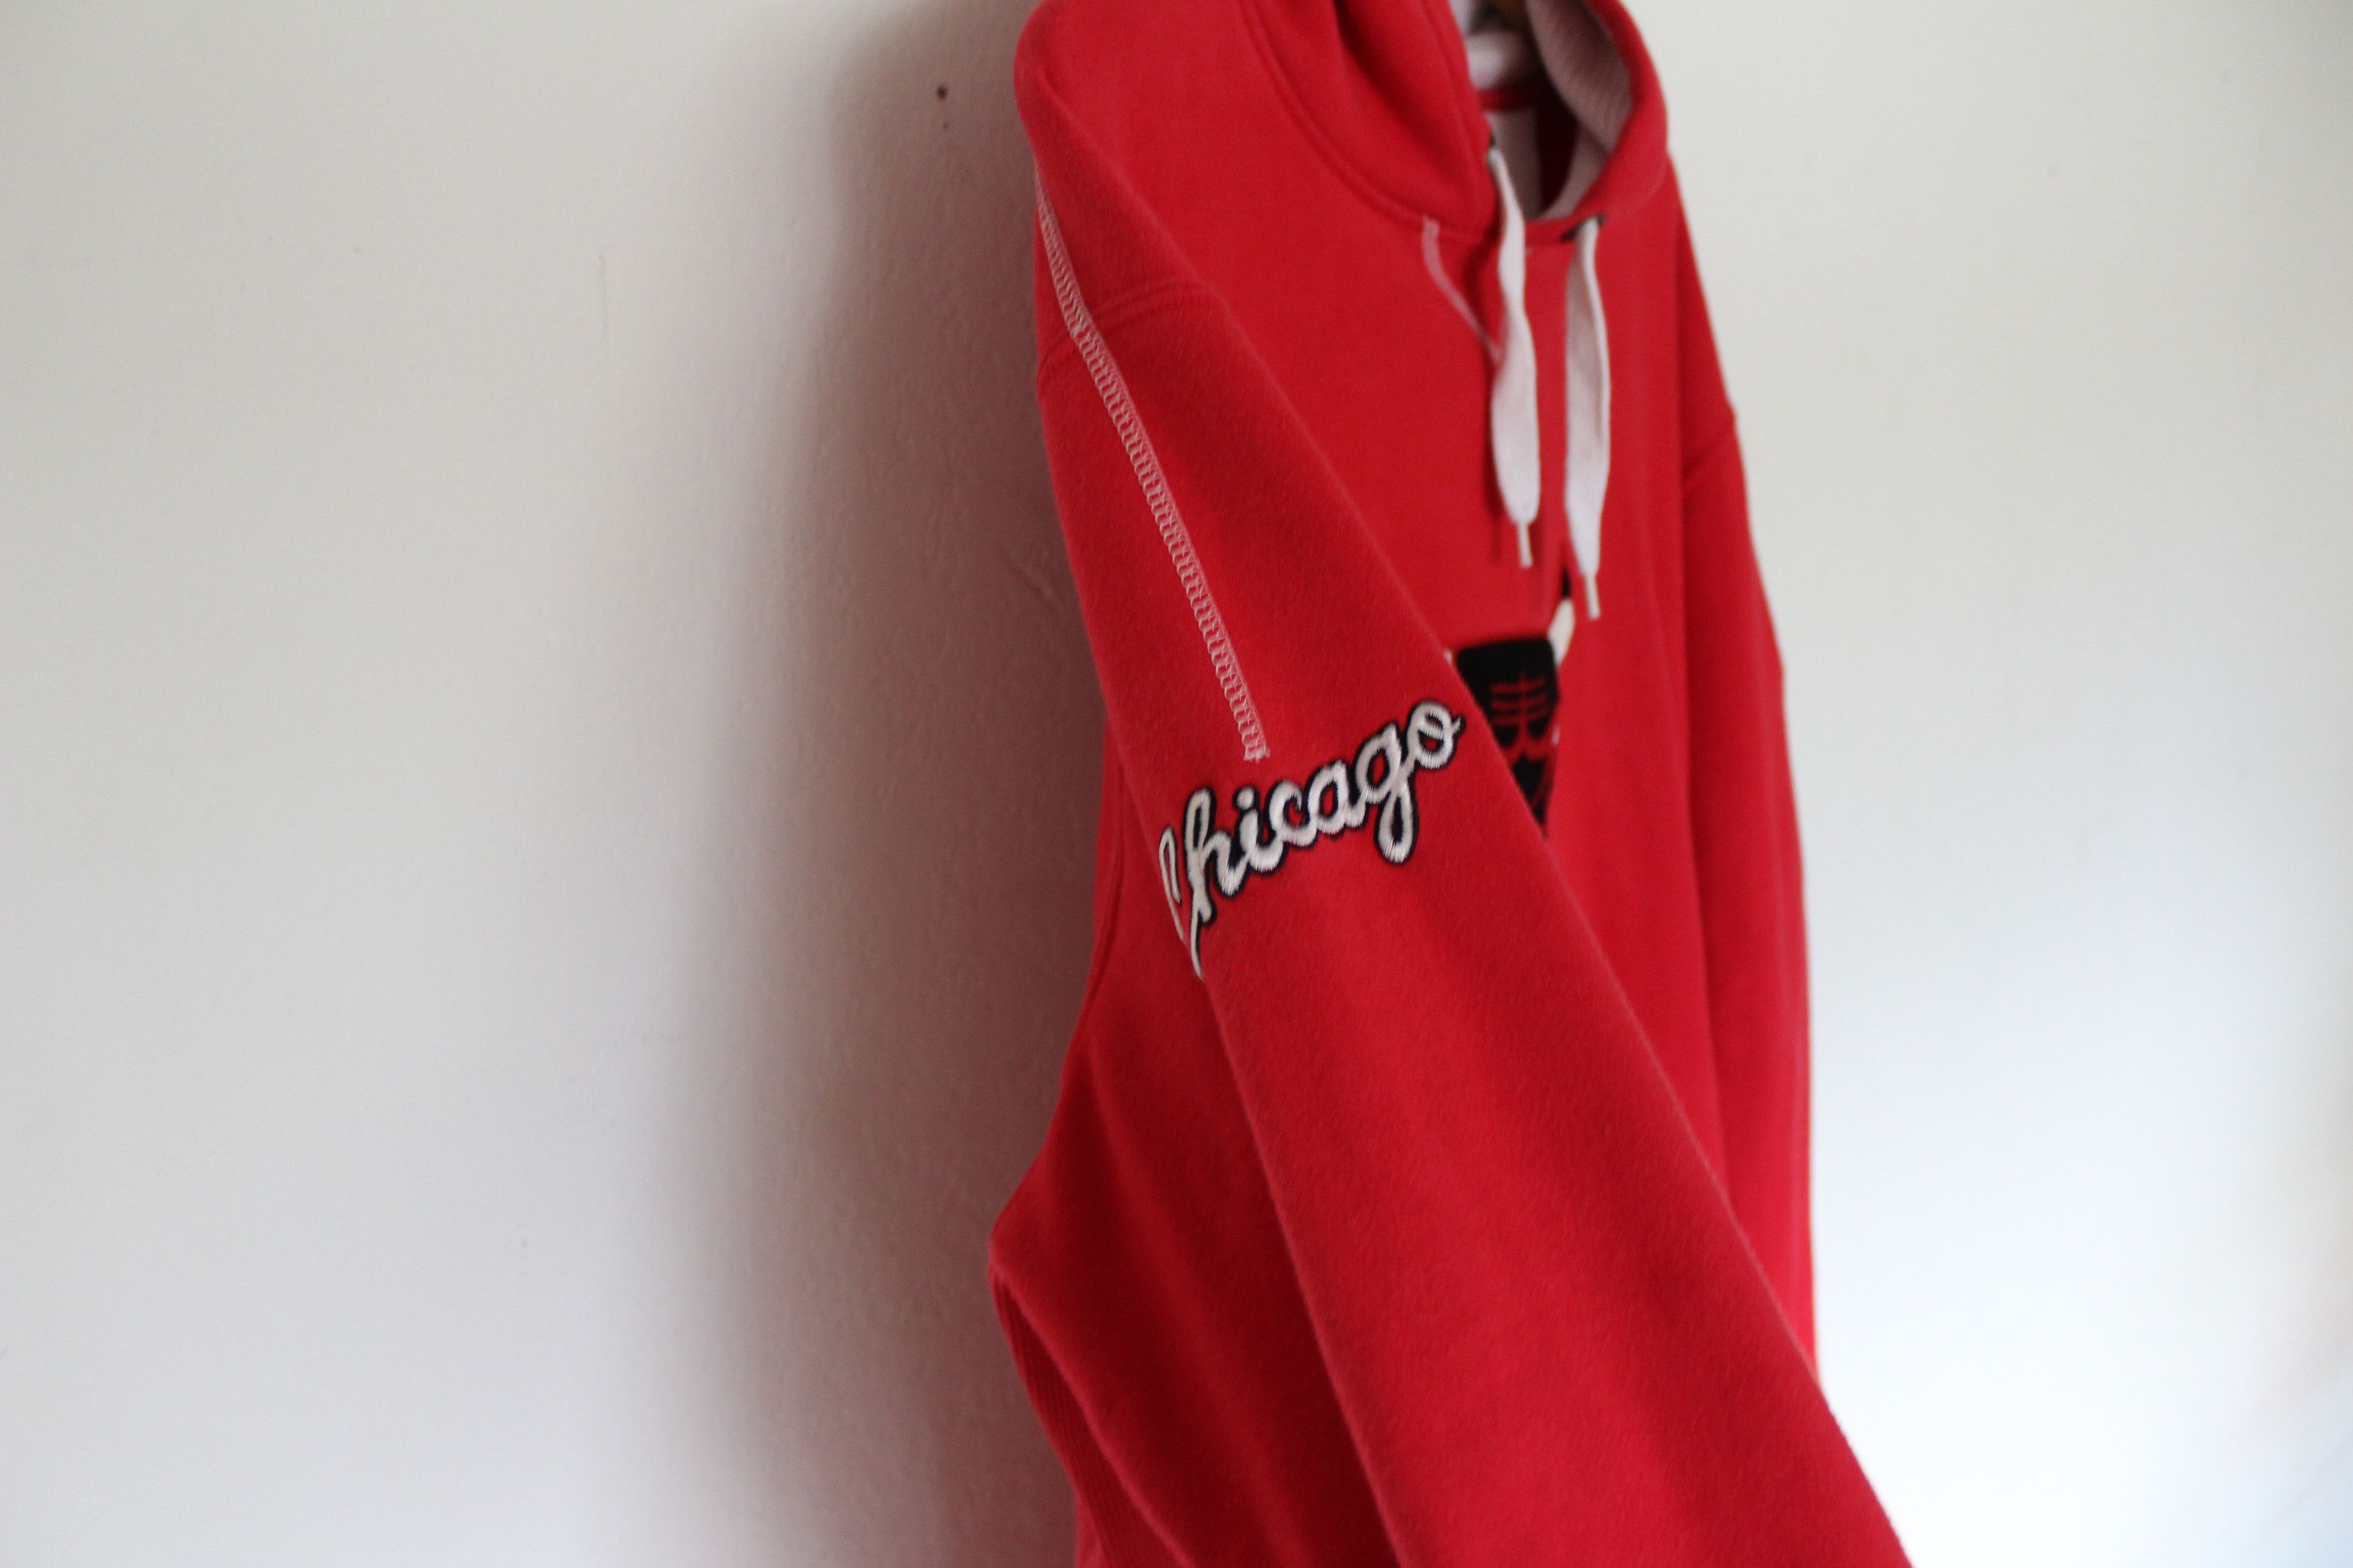 Chicago Bulls Embroidered Chicago Bulls Hoodie Size US L / EU 52-54 / 3 - 2 Preview